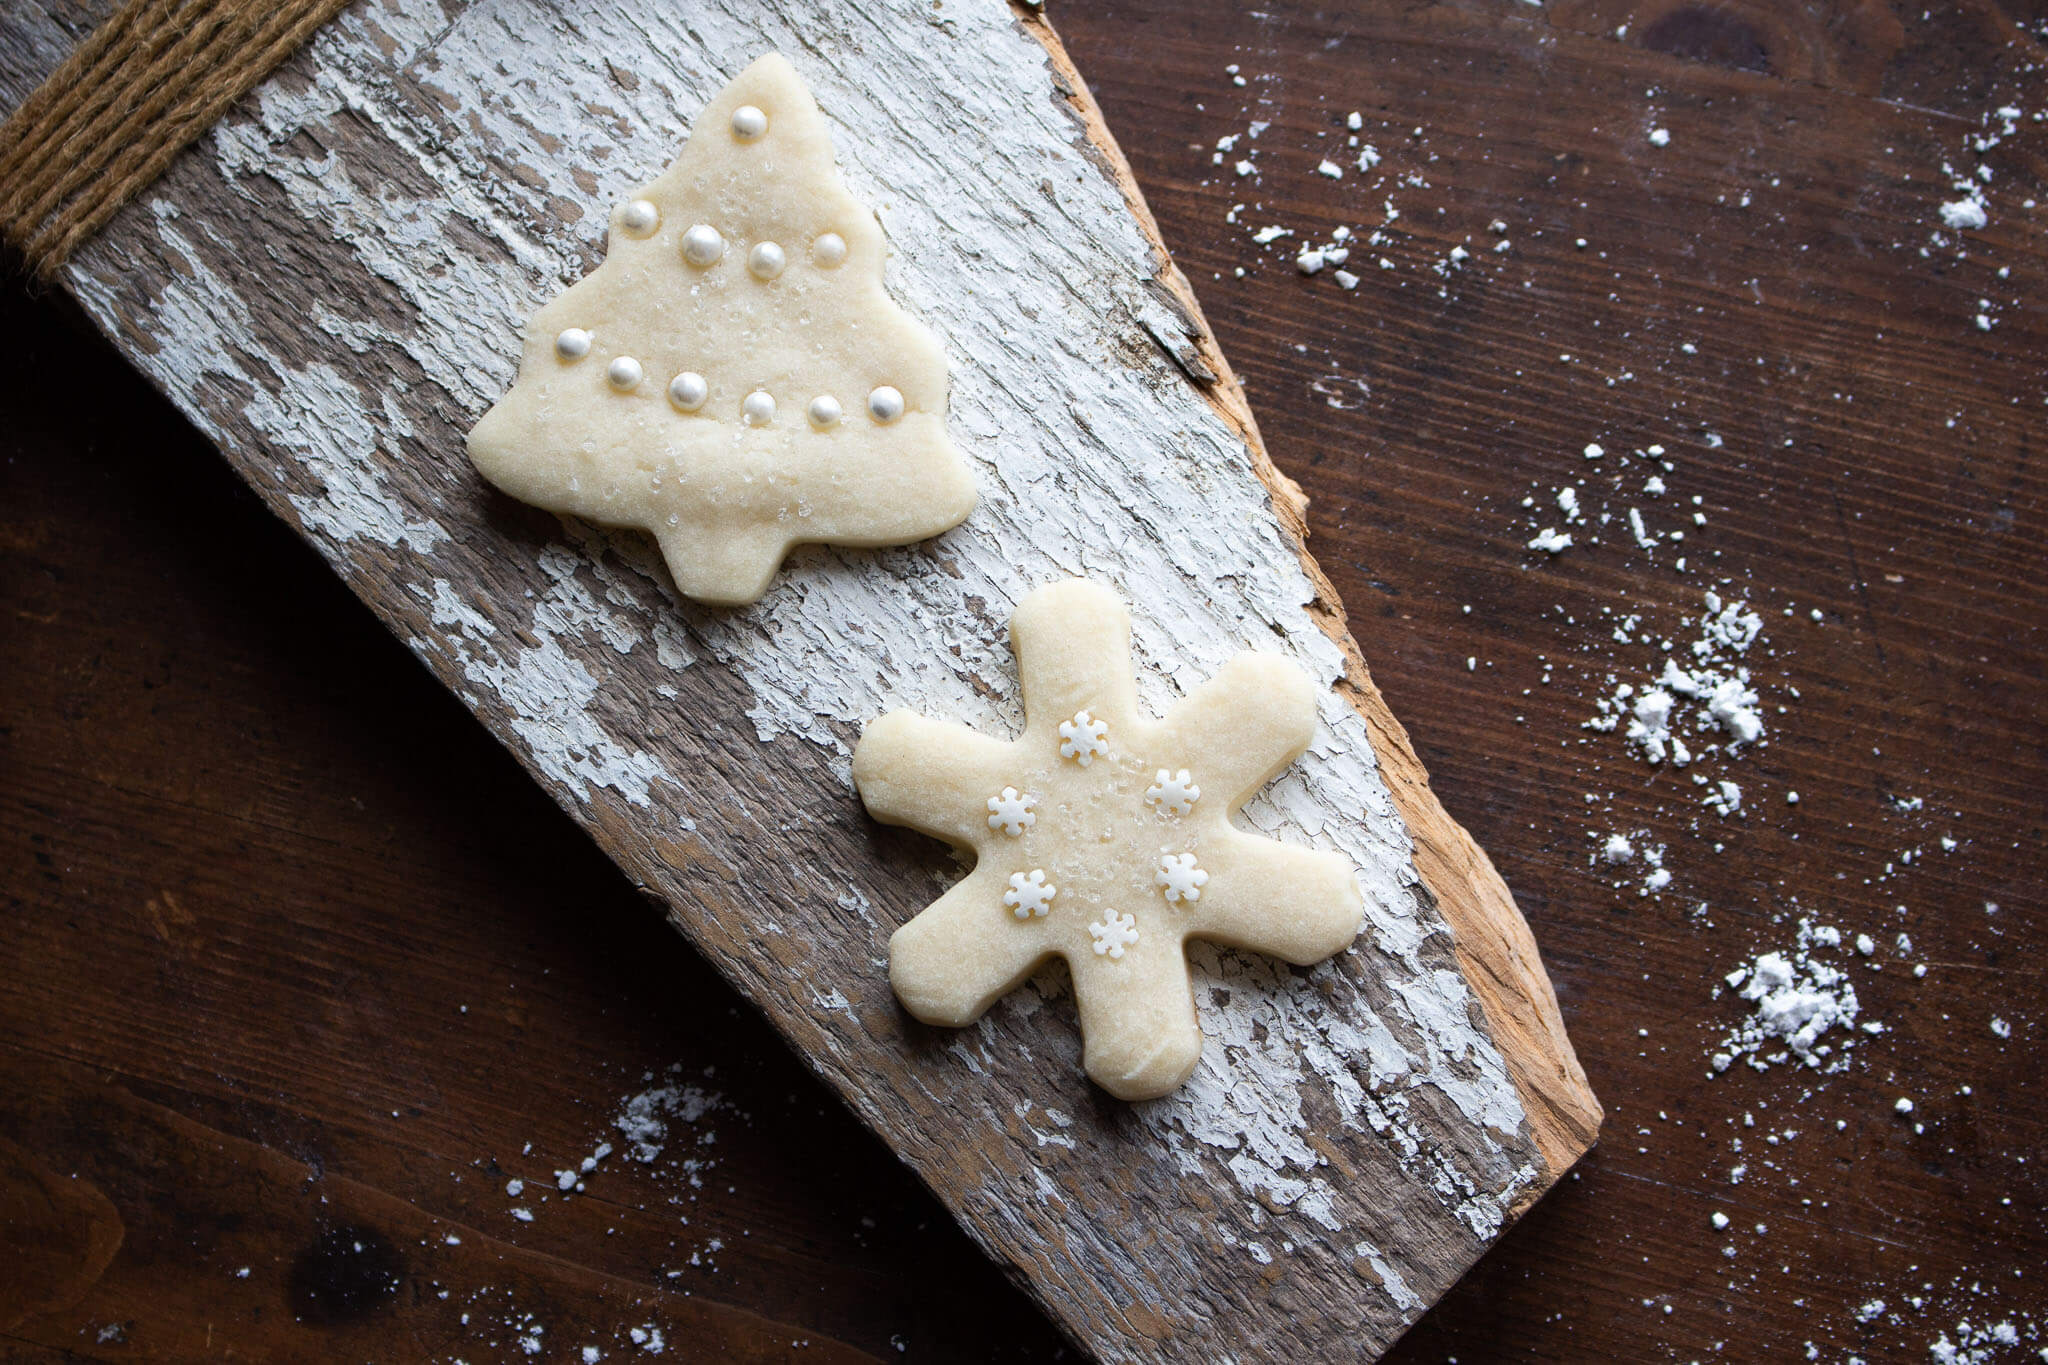 Two of the best sugar cookies on a wooden cutting board.